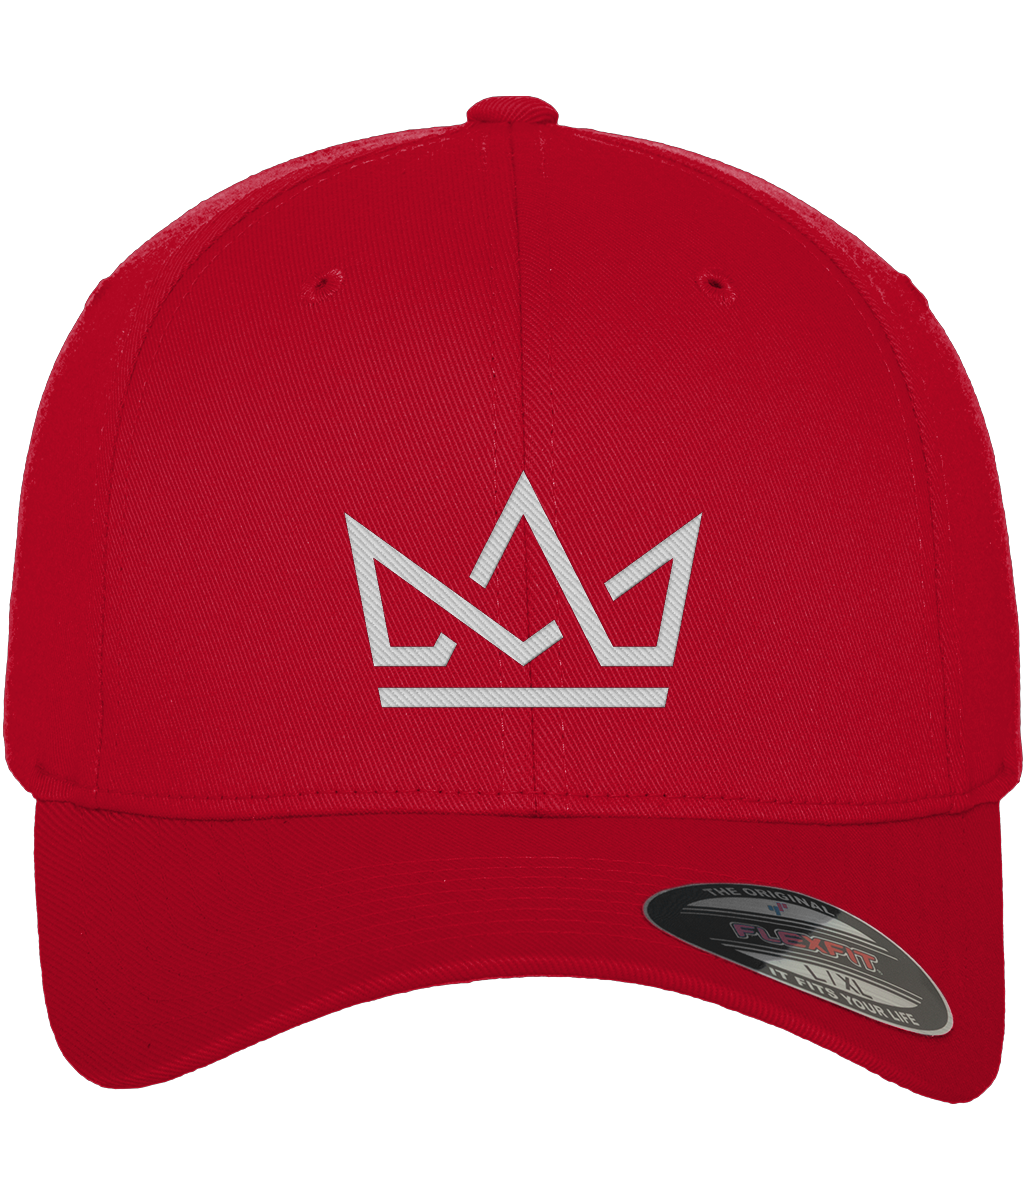 Crown - Fitted Baseball Cap